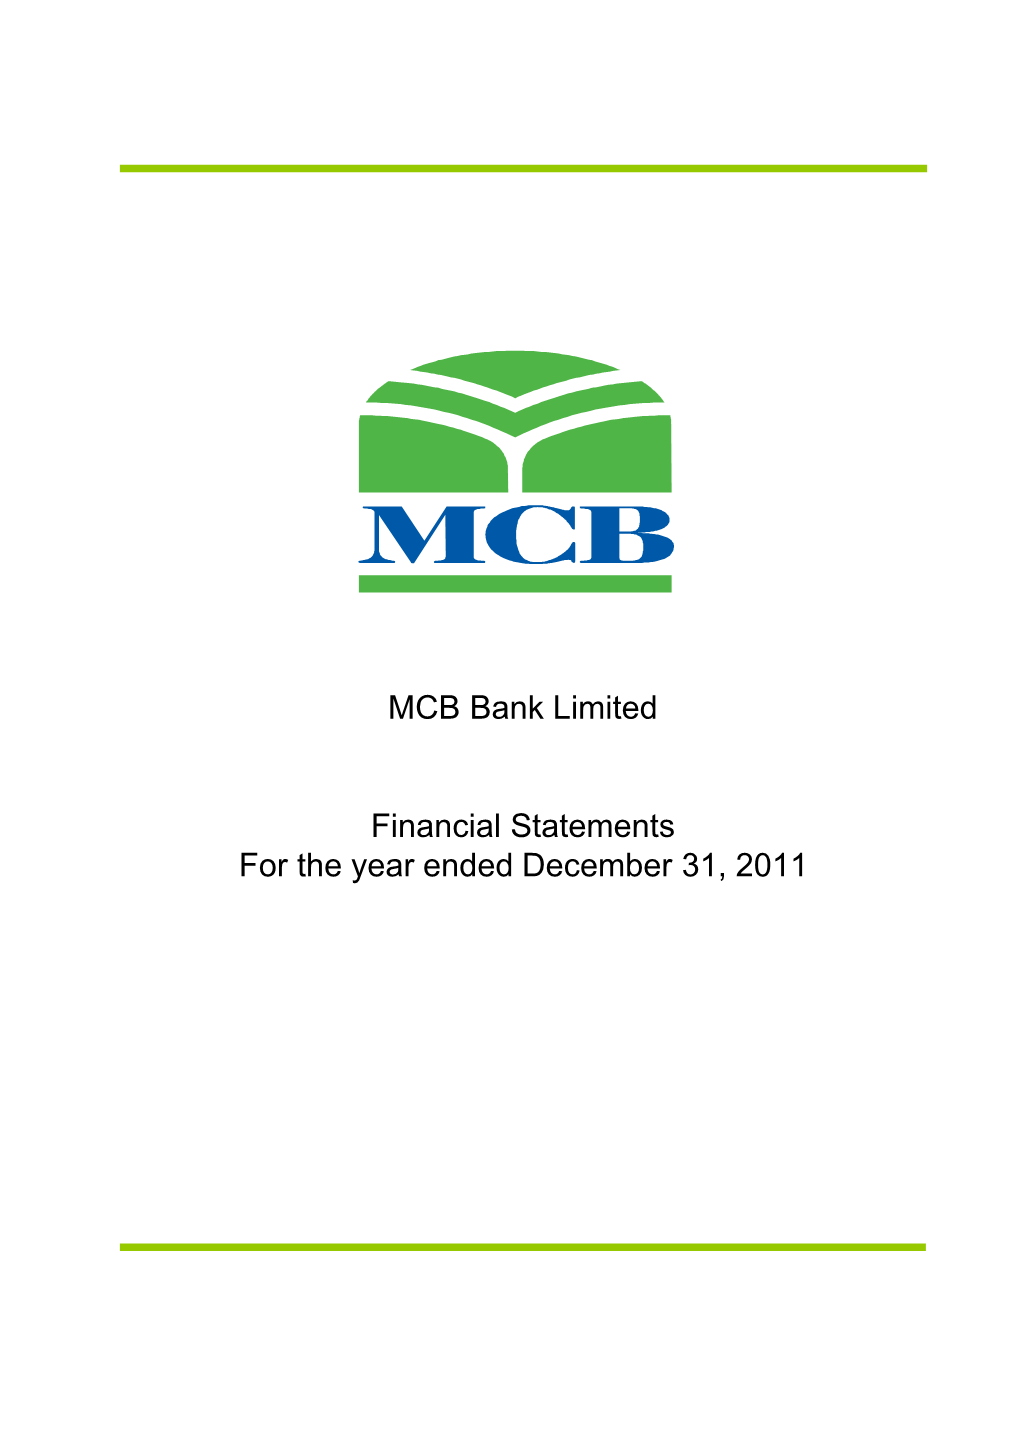 MCB Bank Limited Financial Statements for the Year Ended